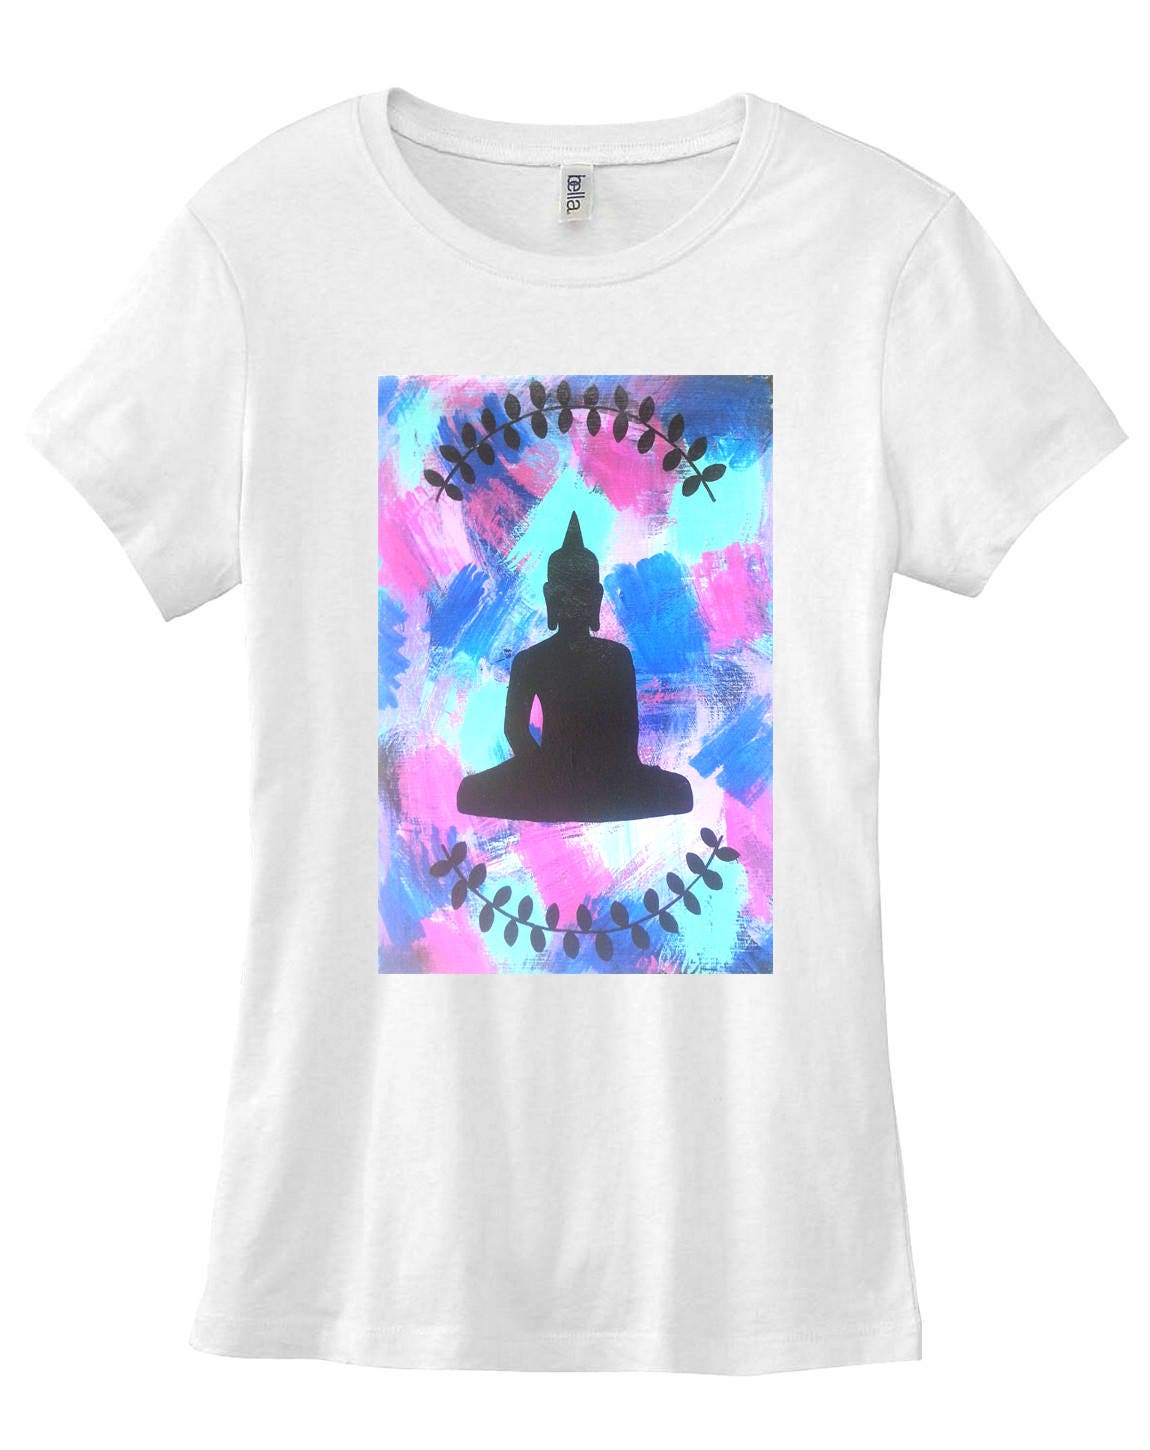 zen Buddha t-shirt available in size s med large and Xl for